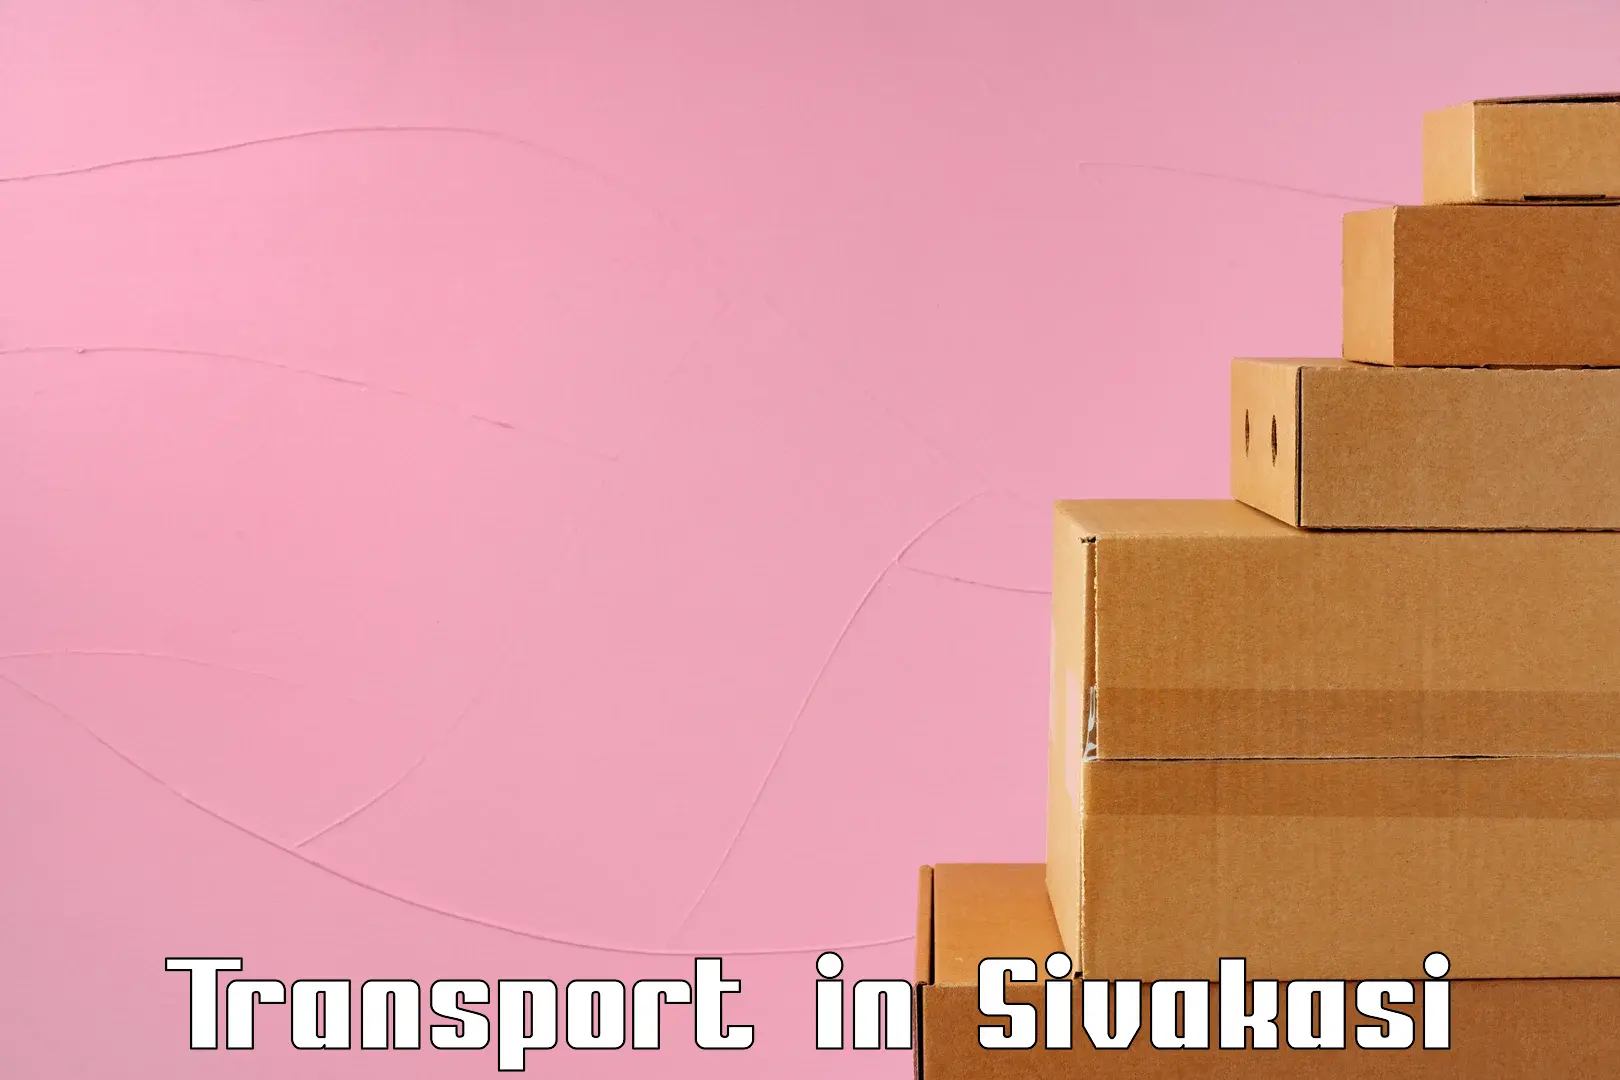 Air freight transport services in Sivakasi